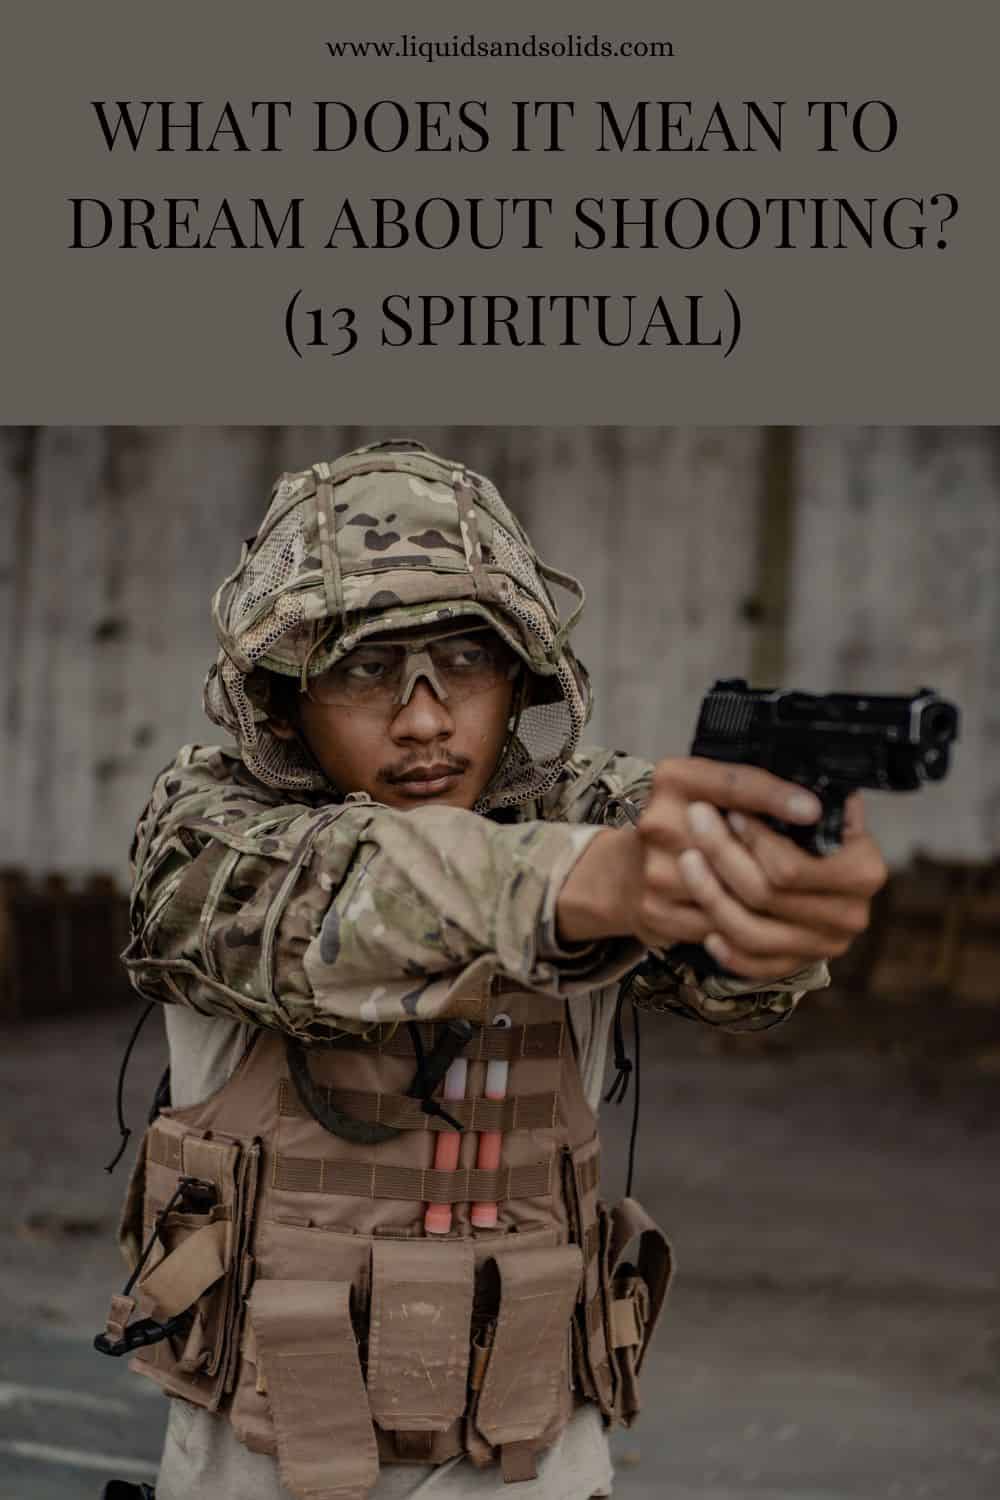 What Does It Mean To Dream About Shooting? (13 Spiritual)